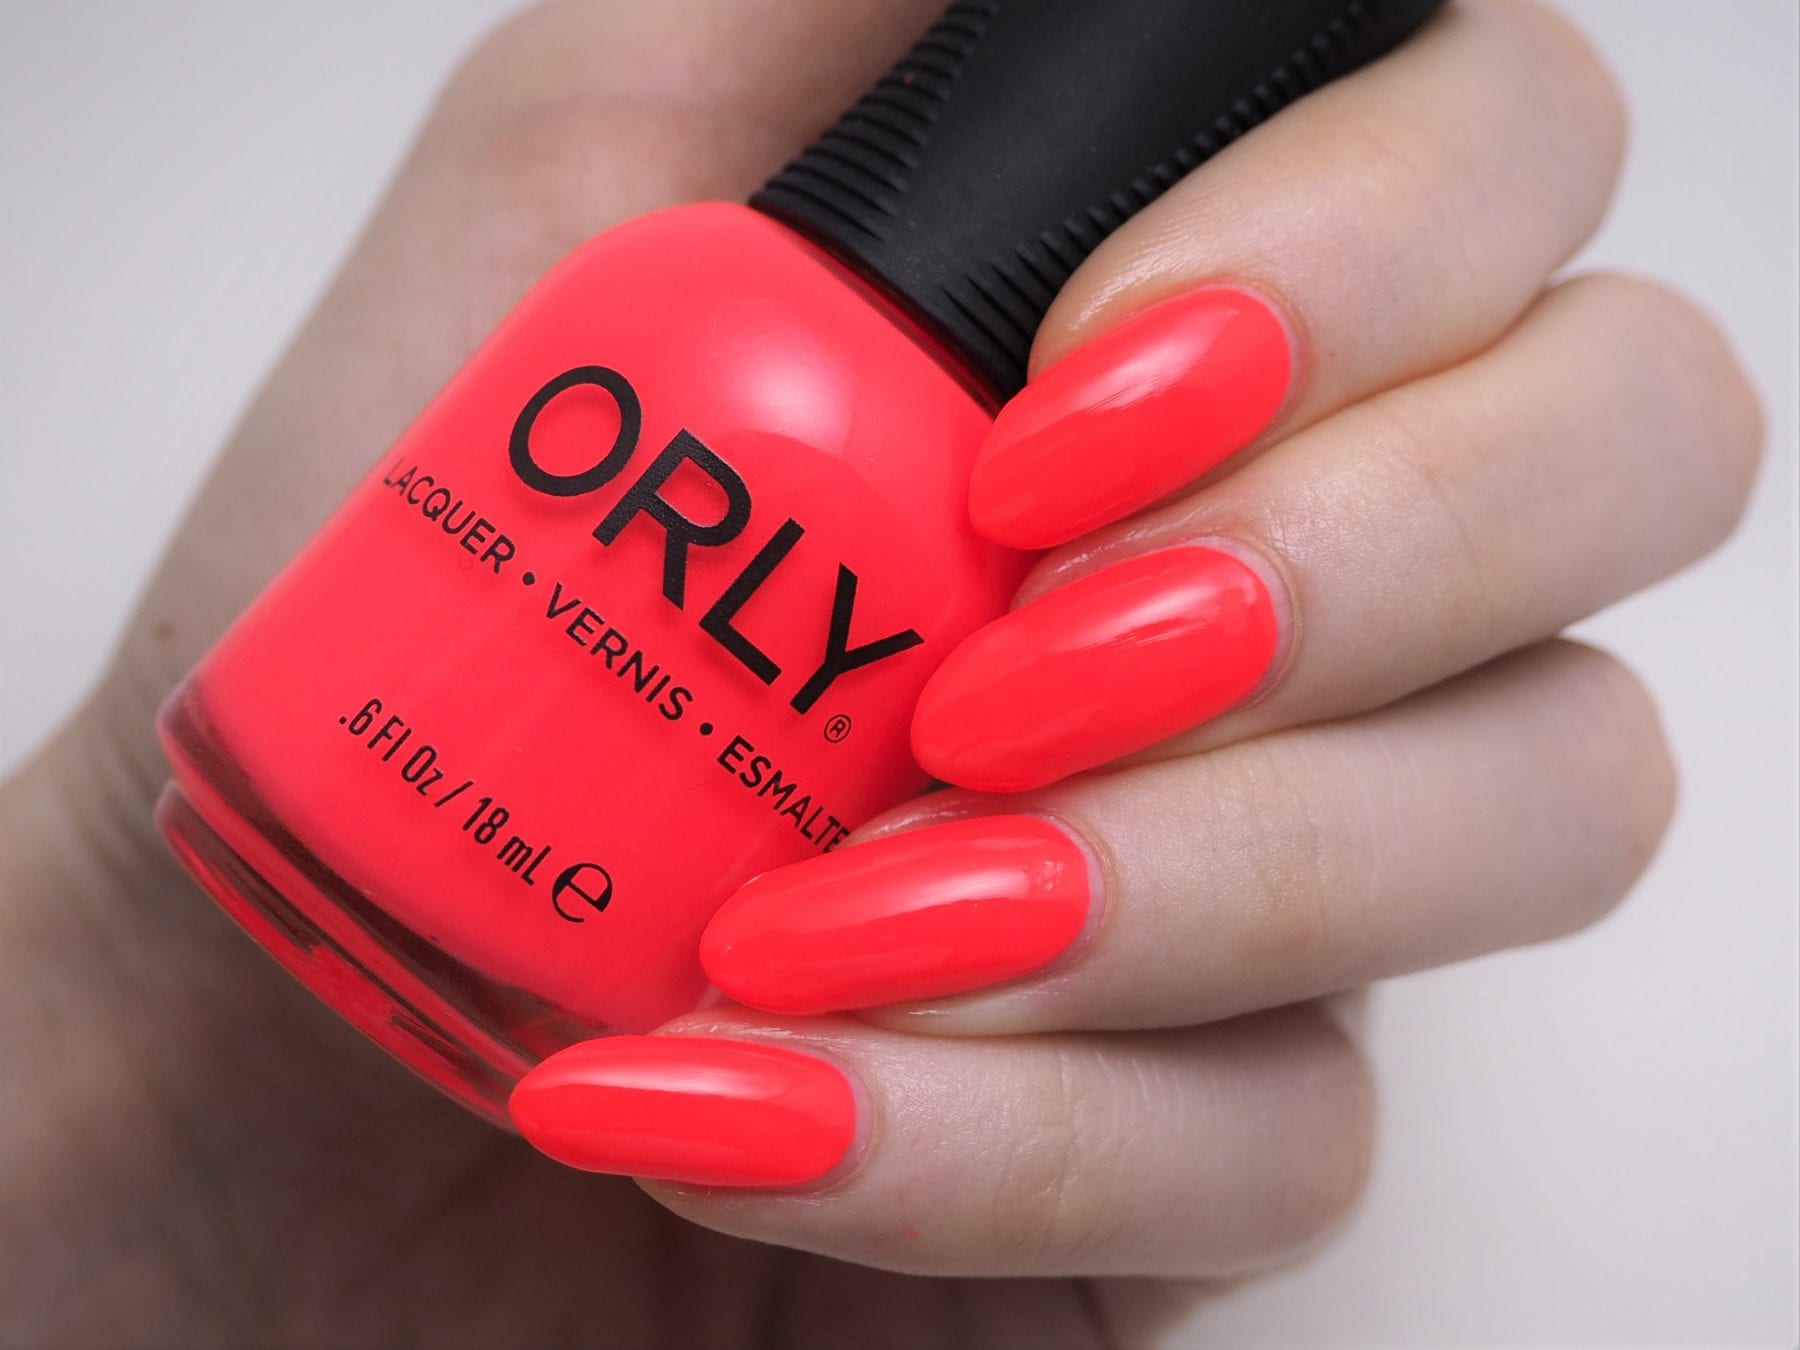 Orly Gel Nail Polish Colors - wide 8